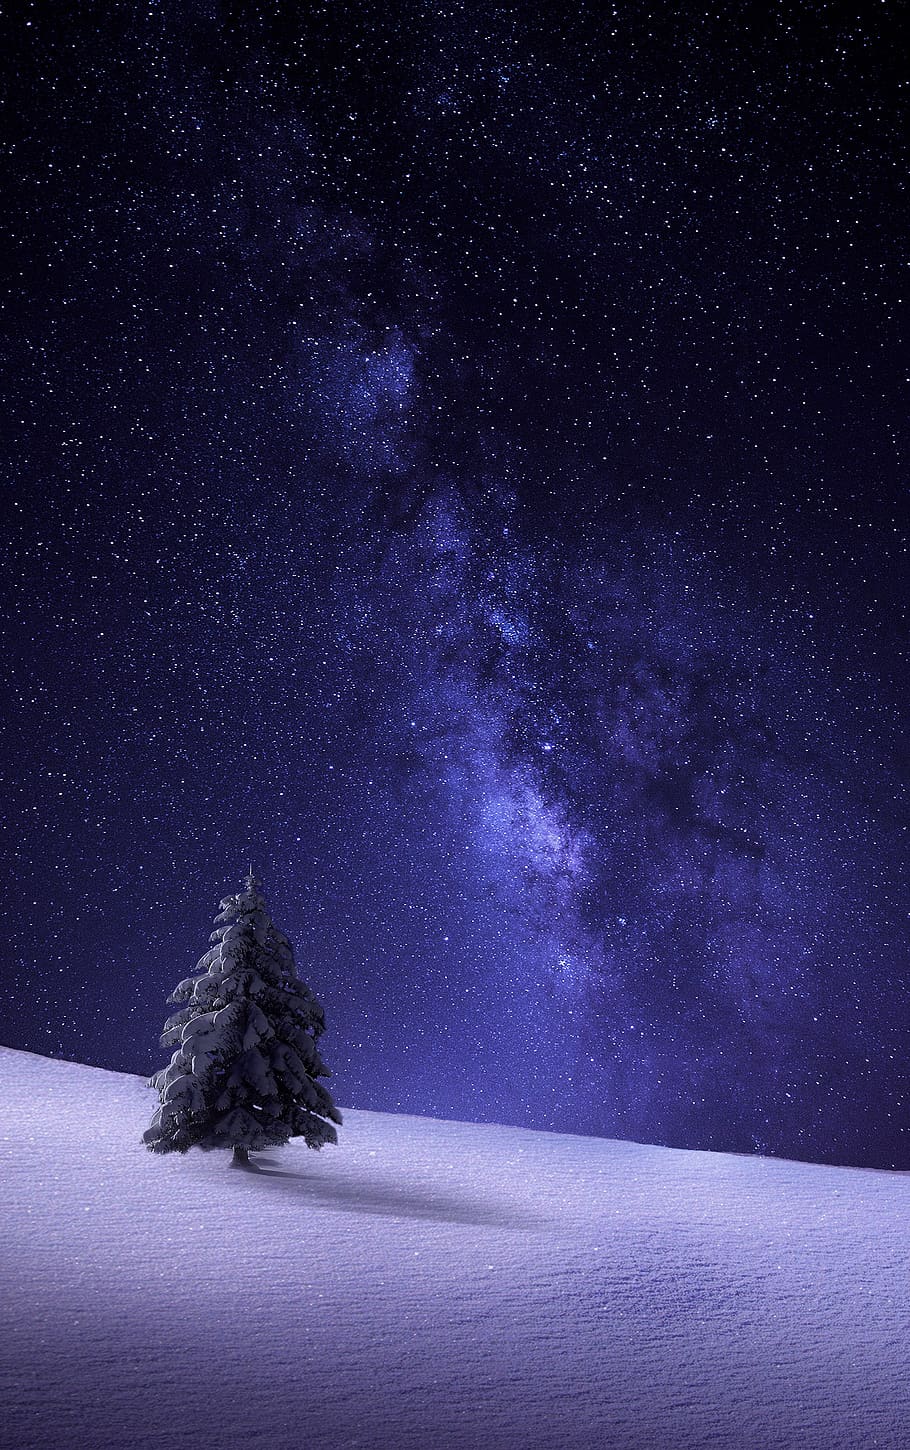 nature, landscape, winter, the winter's tale, christmas, christmas fairy tale, snow, wintry, star, starry sky